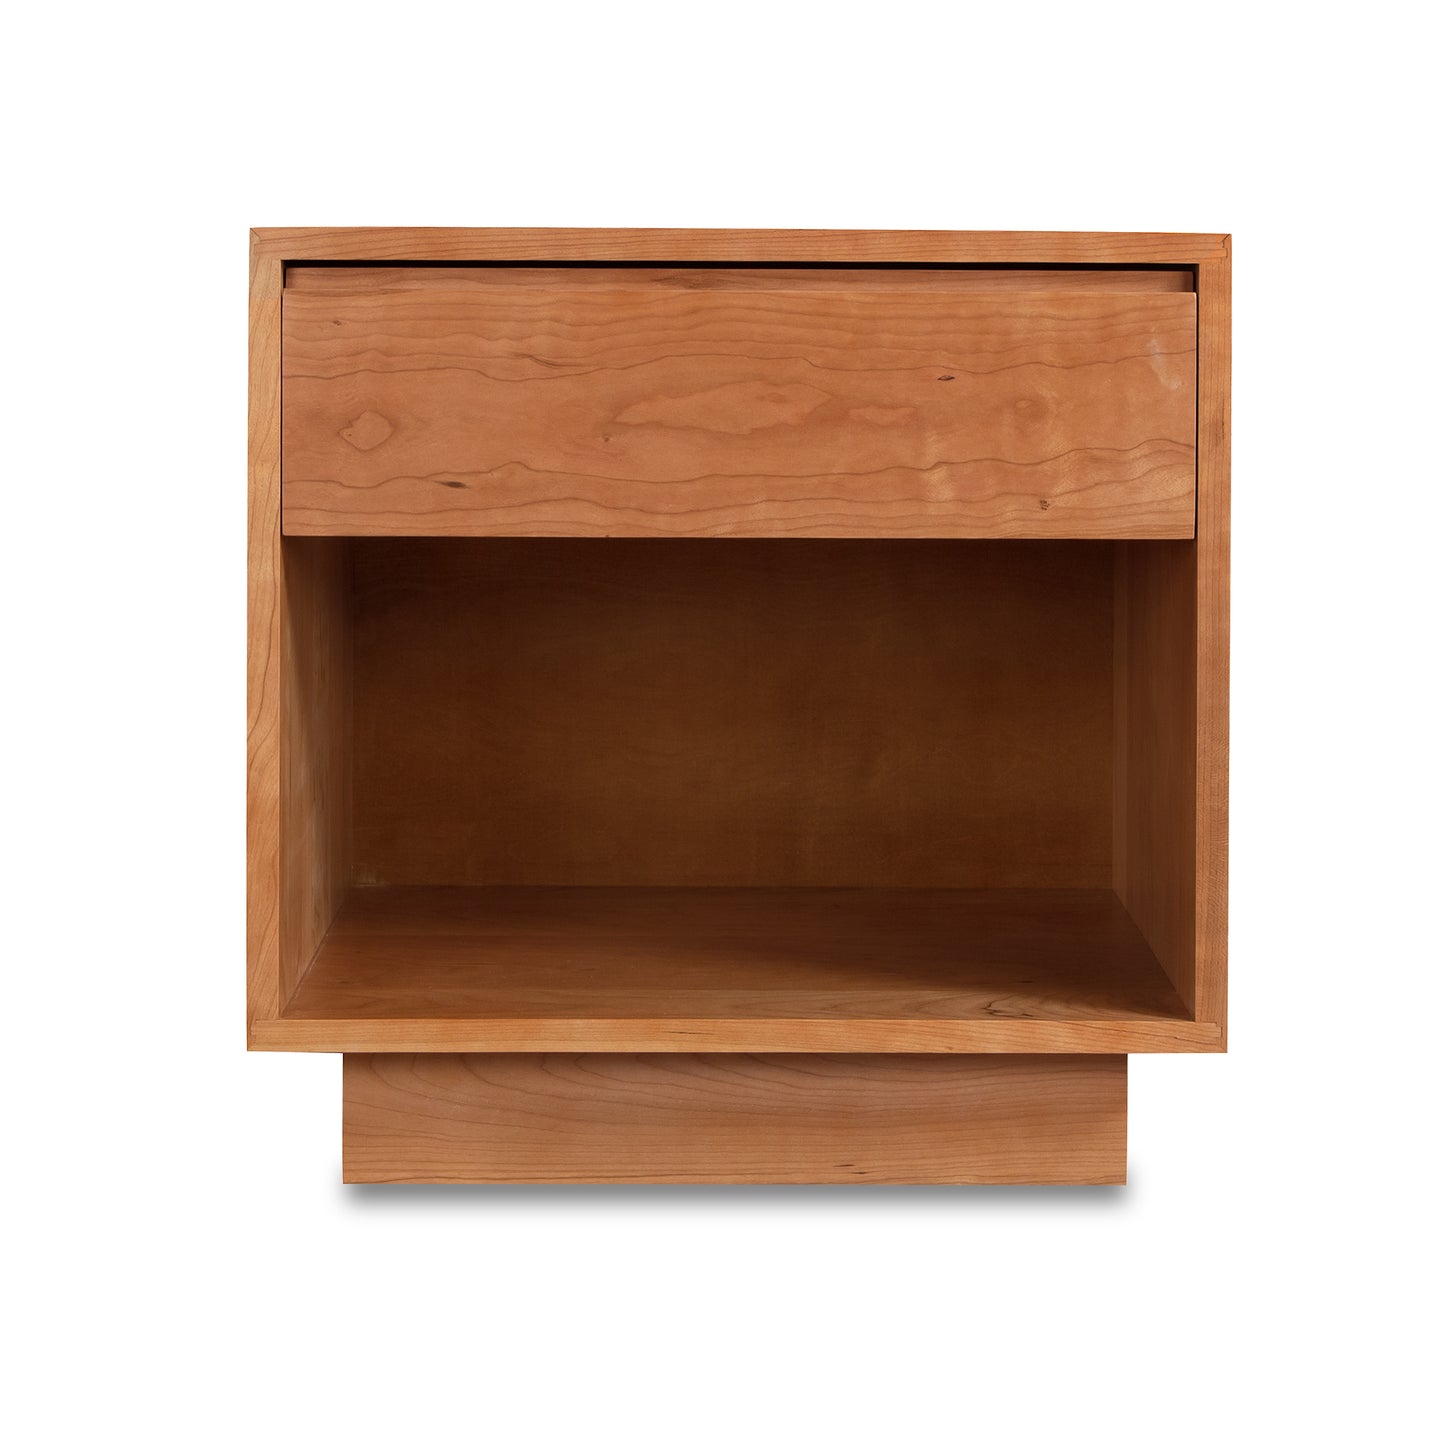 A handcrafted Sutton 1-Drawer Enclosed Shelf Nightstand by Lyndon Furniture with two drawers and a shelf.